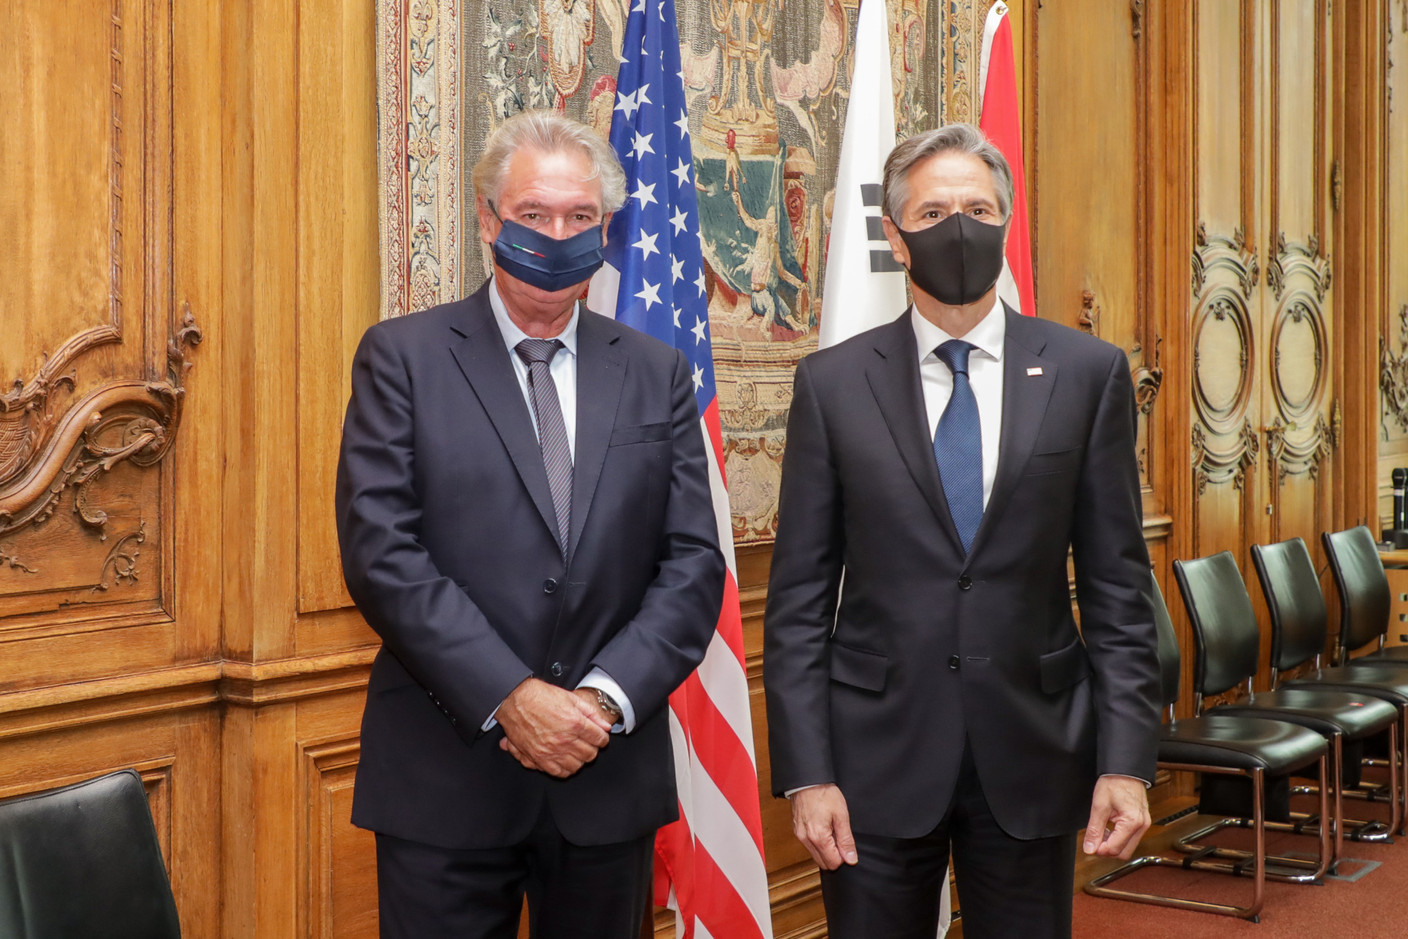 (from l. to r.) Jean Asselborn, Minister for Foreign and European Affairs; Antony Blinken, Secretary of State of the United States of America and Chair of the Council meeting at ministerial level  SIP/LUC DEFLORENNE